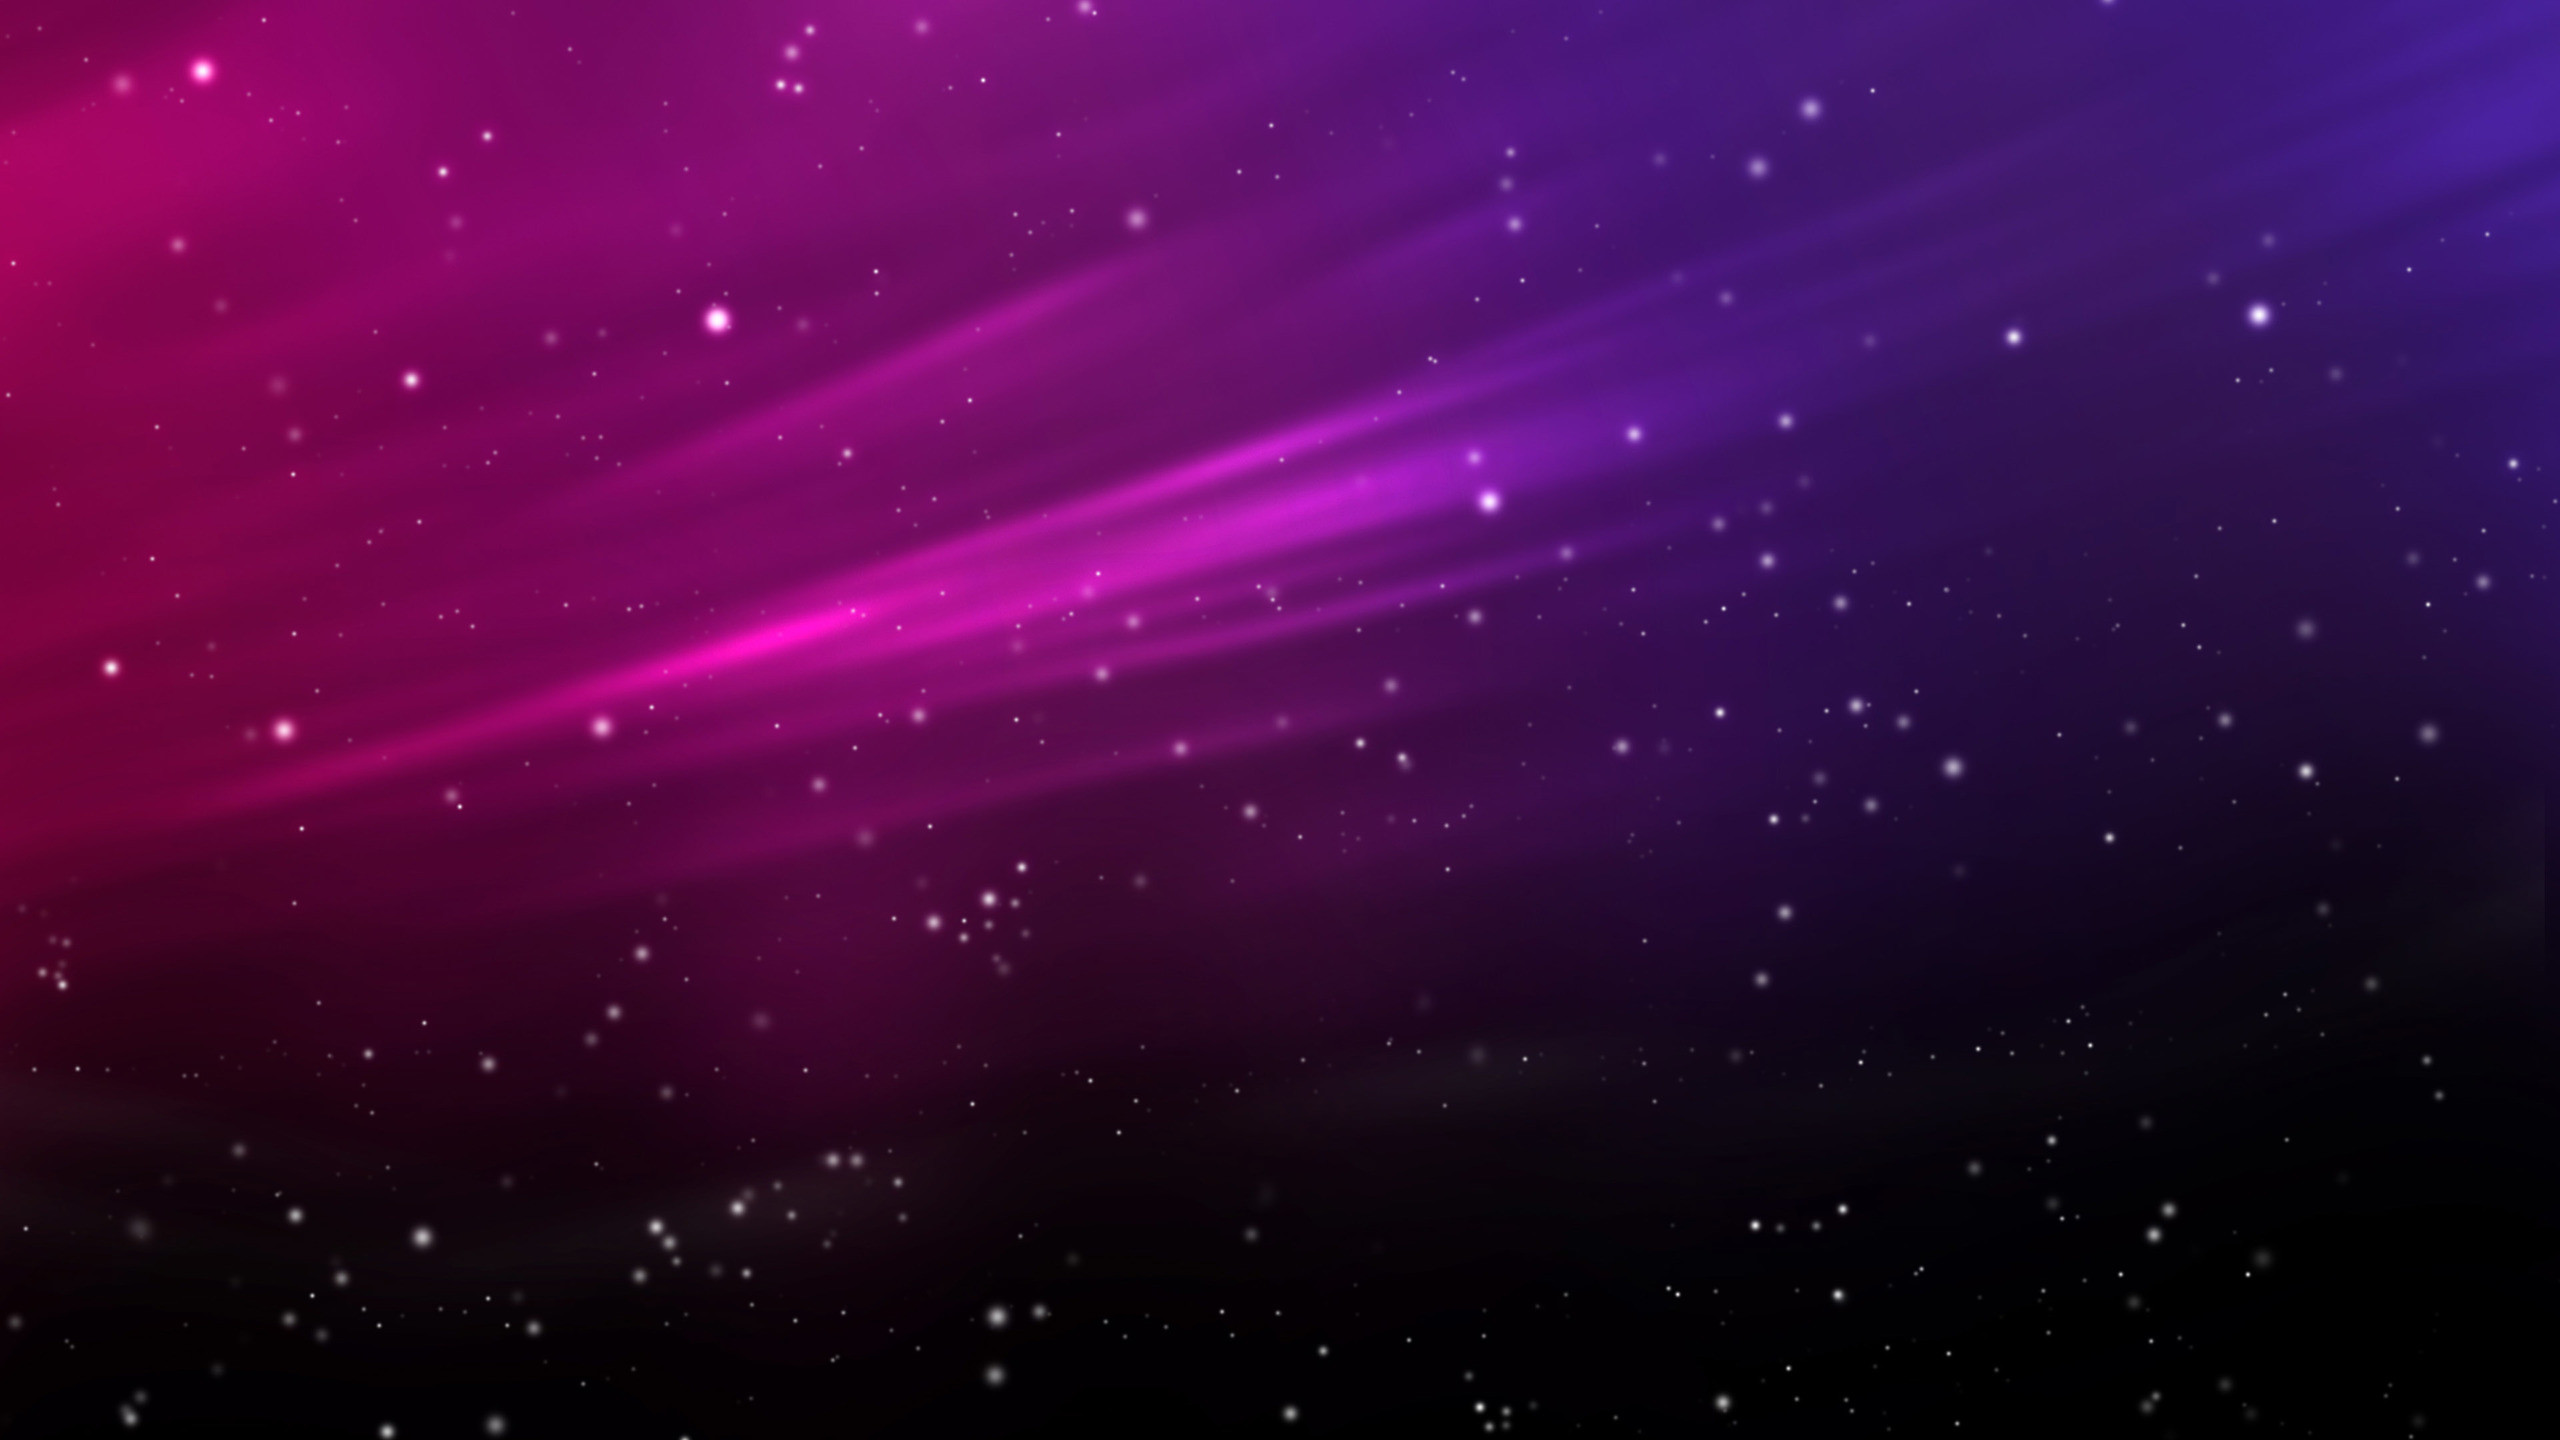 And purple space HD Wallpaper Pink